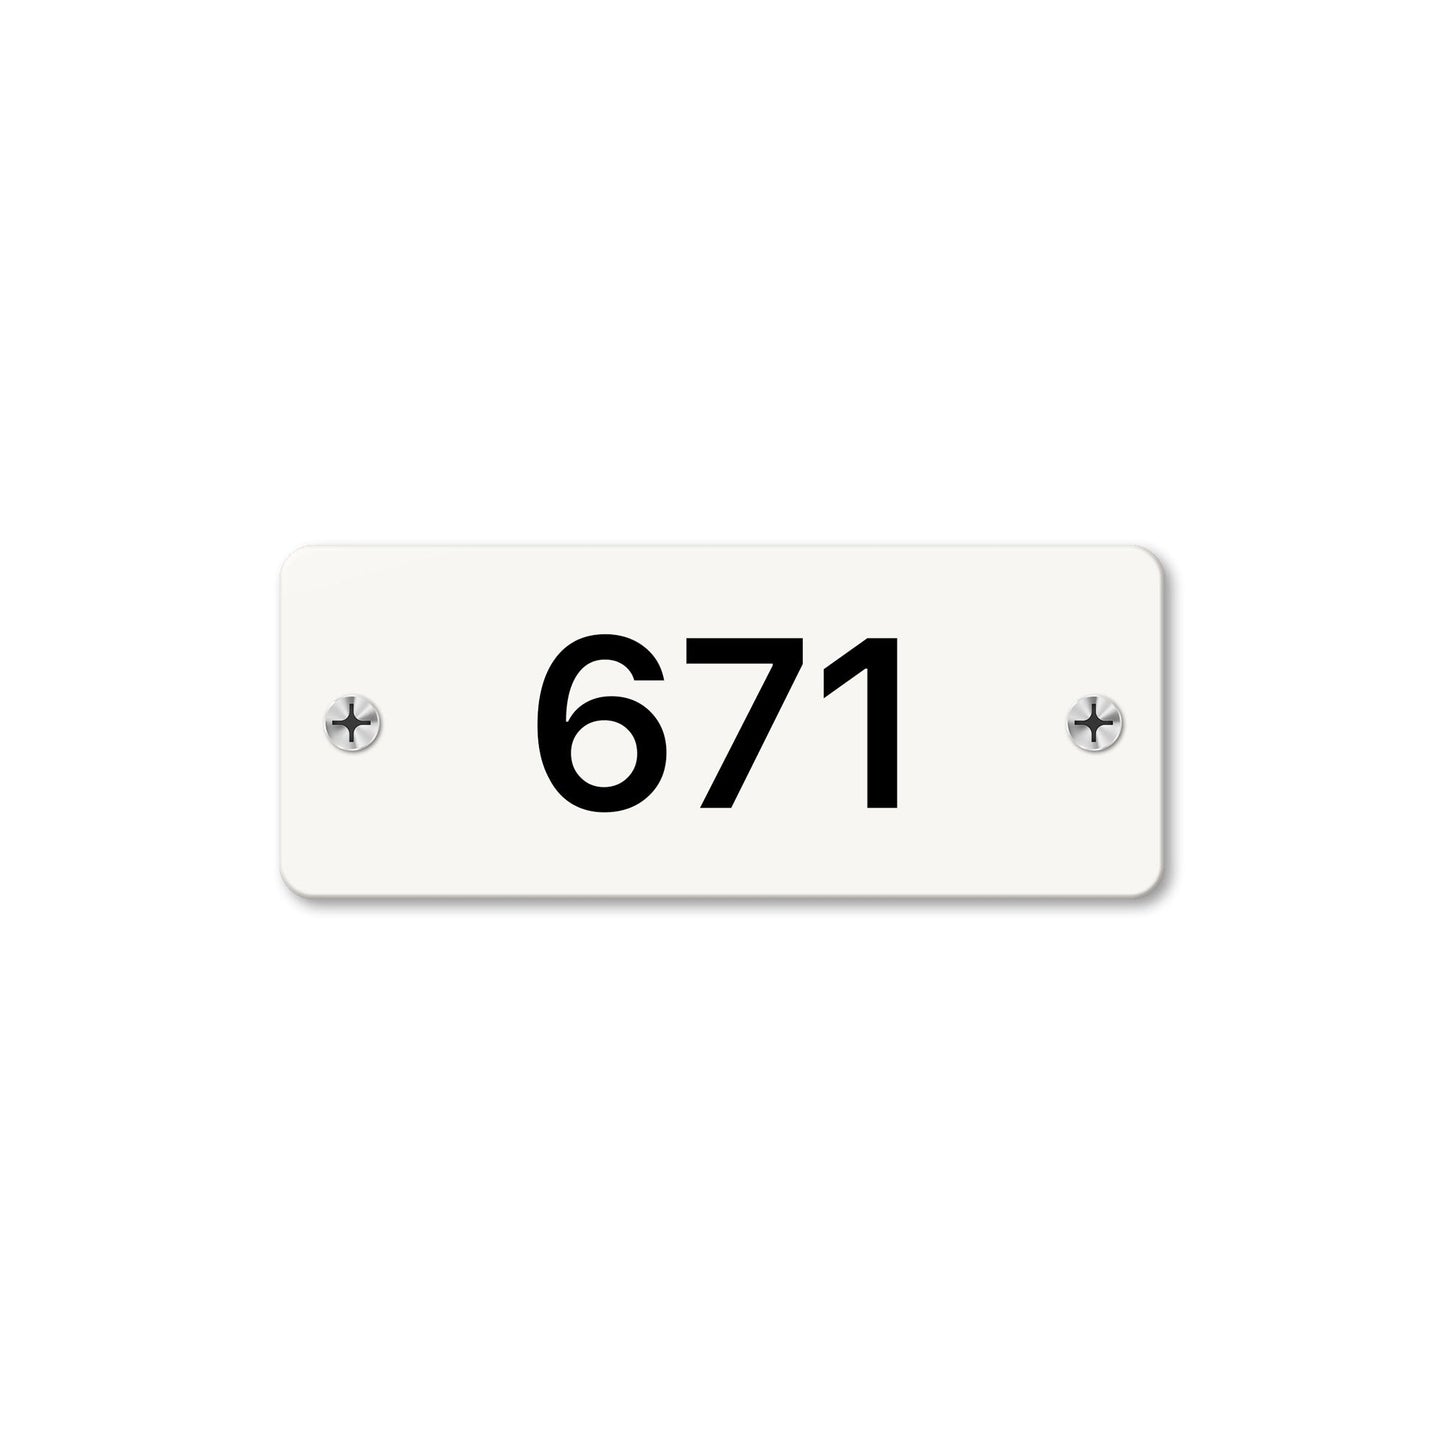 Numeral 671